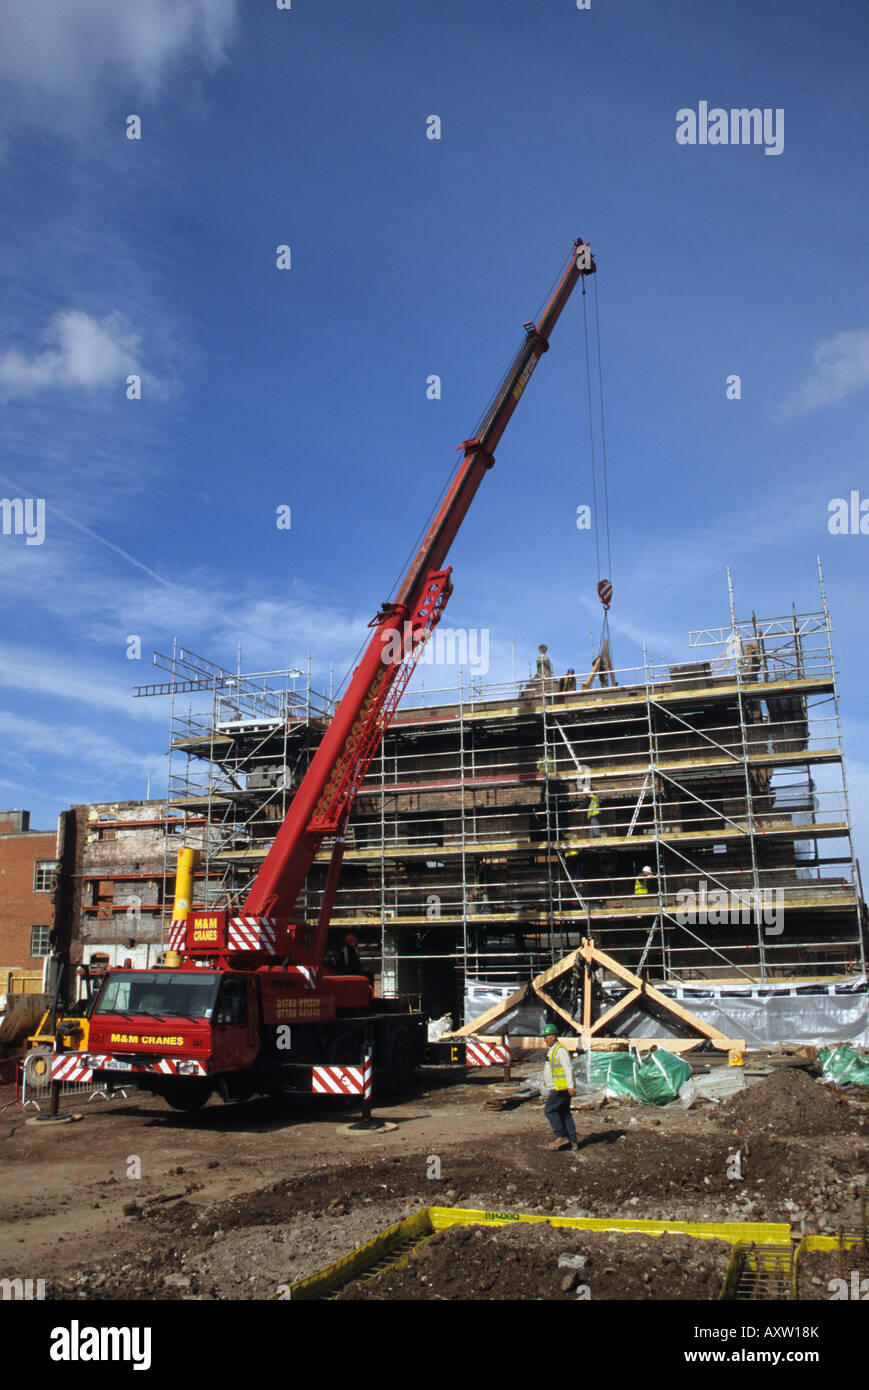 Crane On Building Site In Stoke-on-Trent Lock 38 Countryside Properties Stock Photo